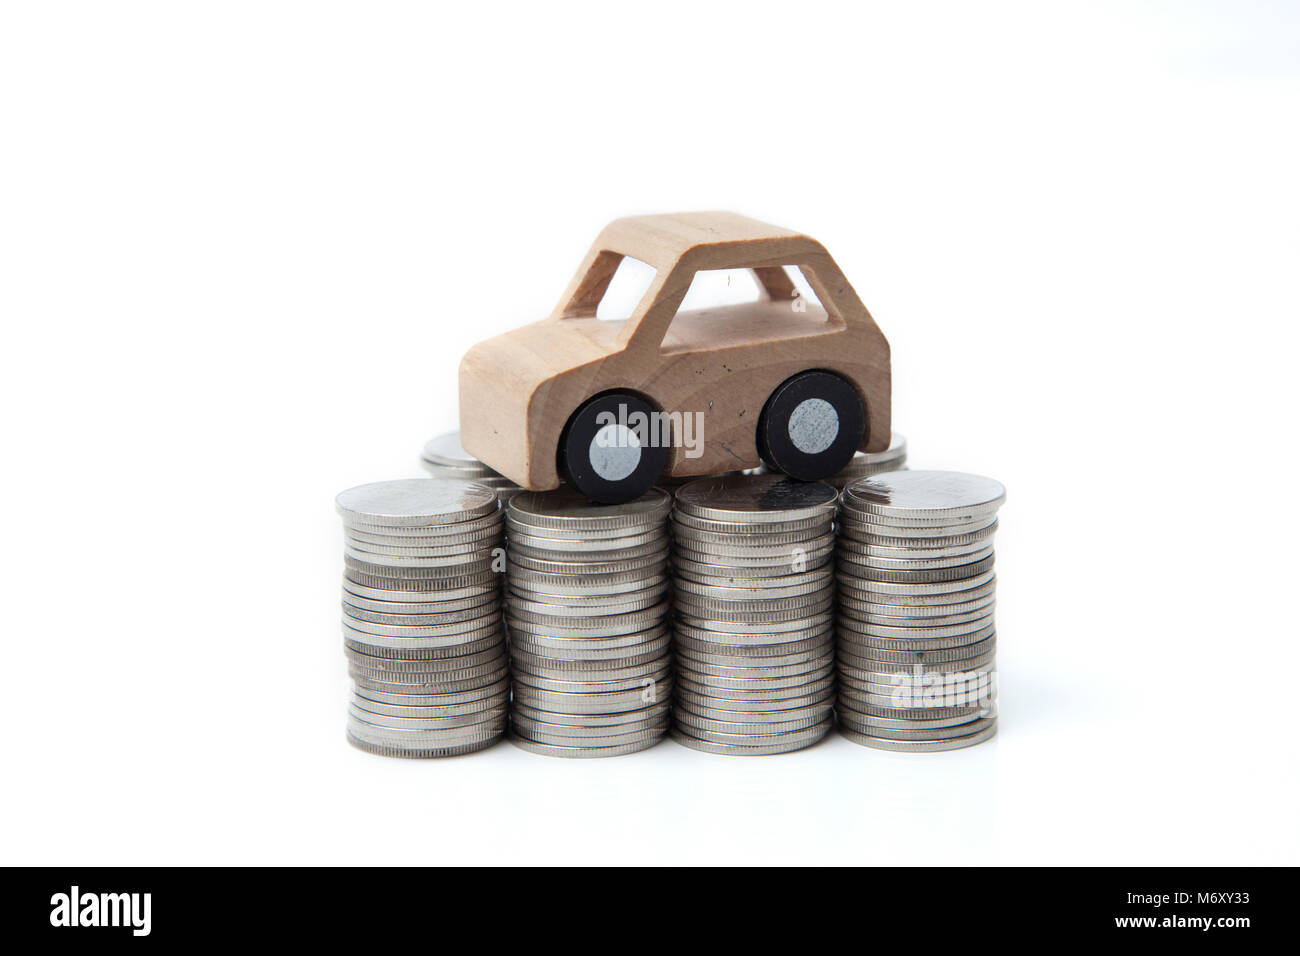 Wooden car model on the coins Stock Photo